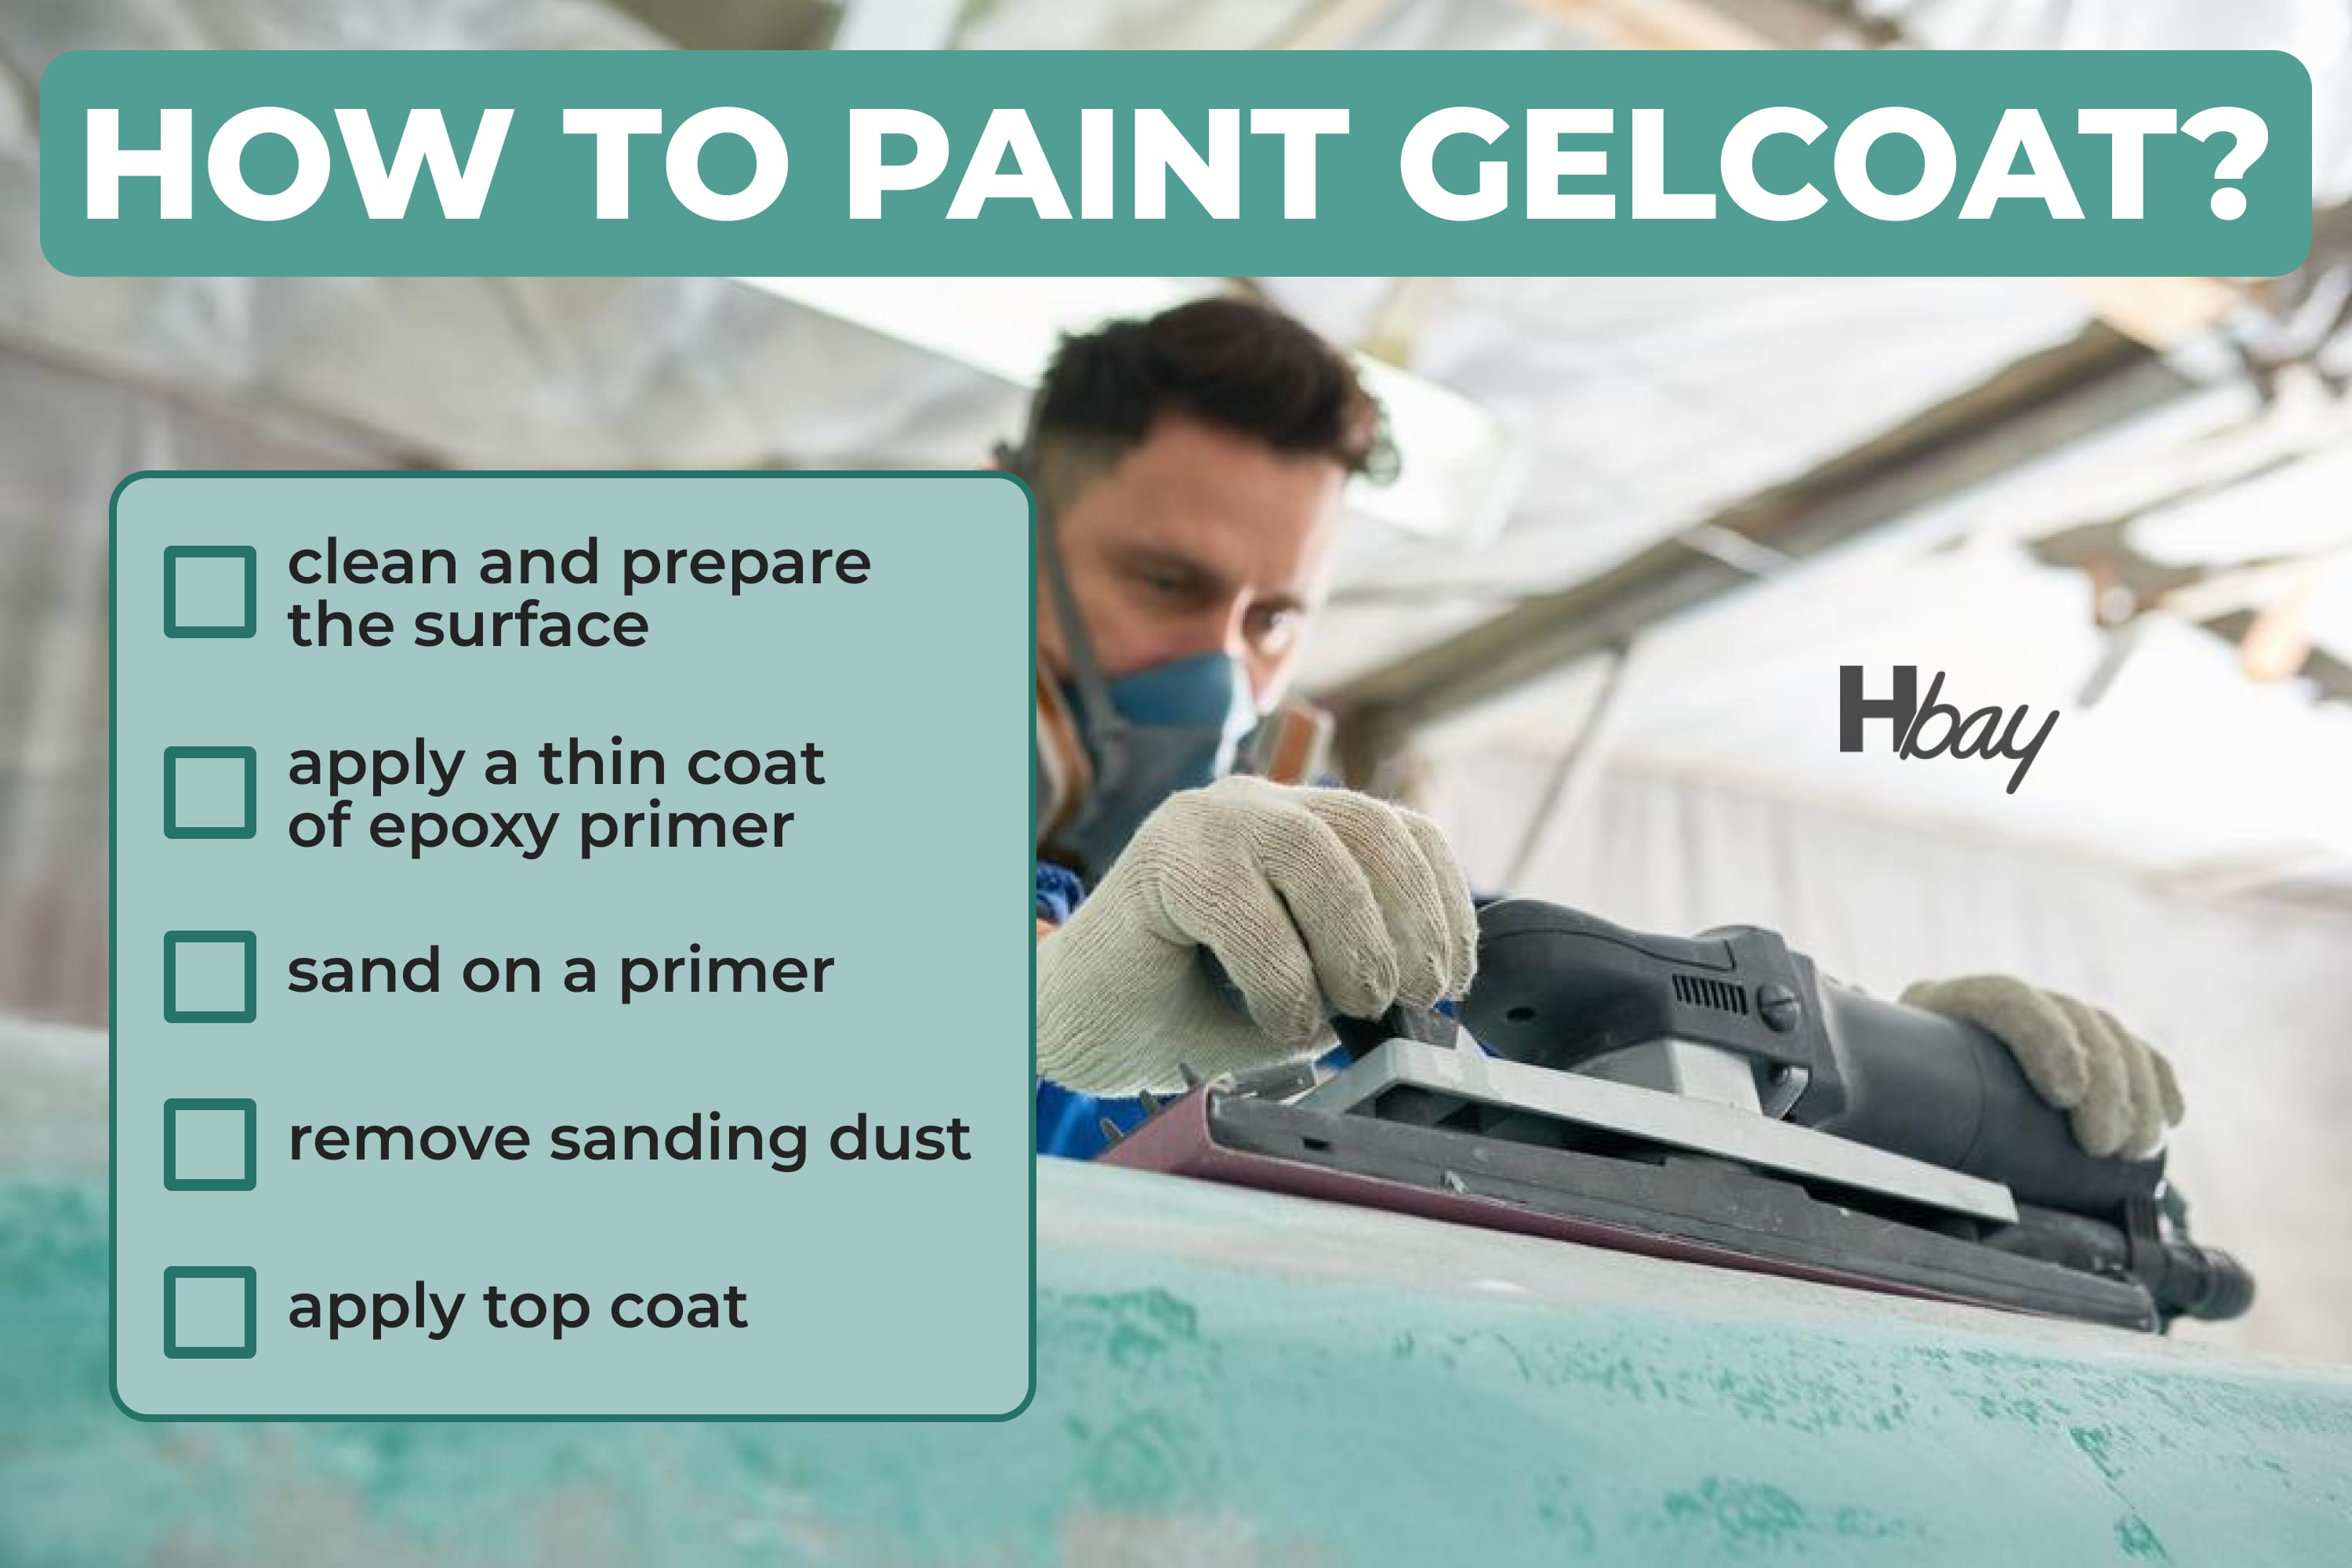 How to paint gelcoat